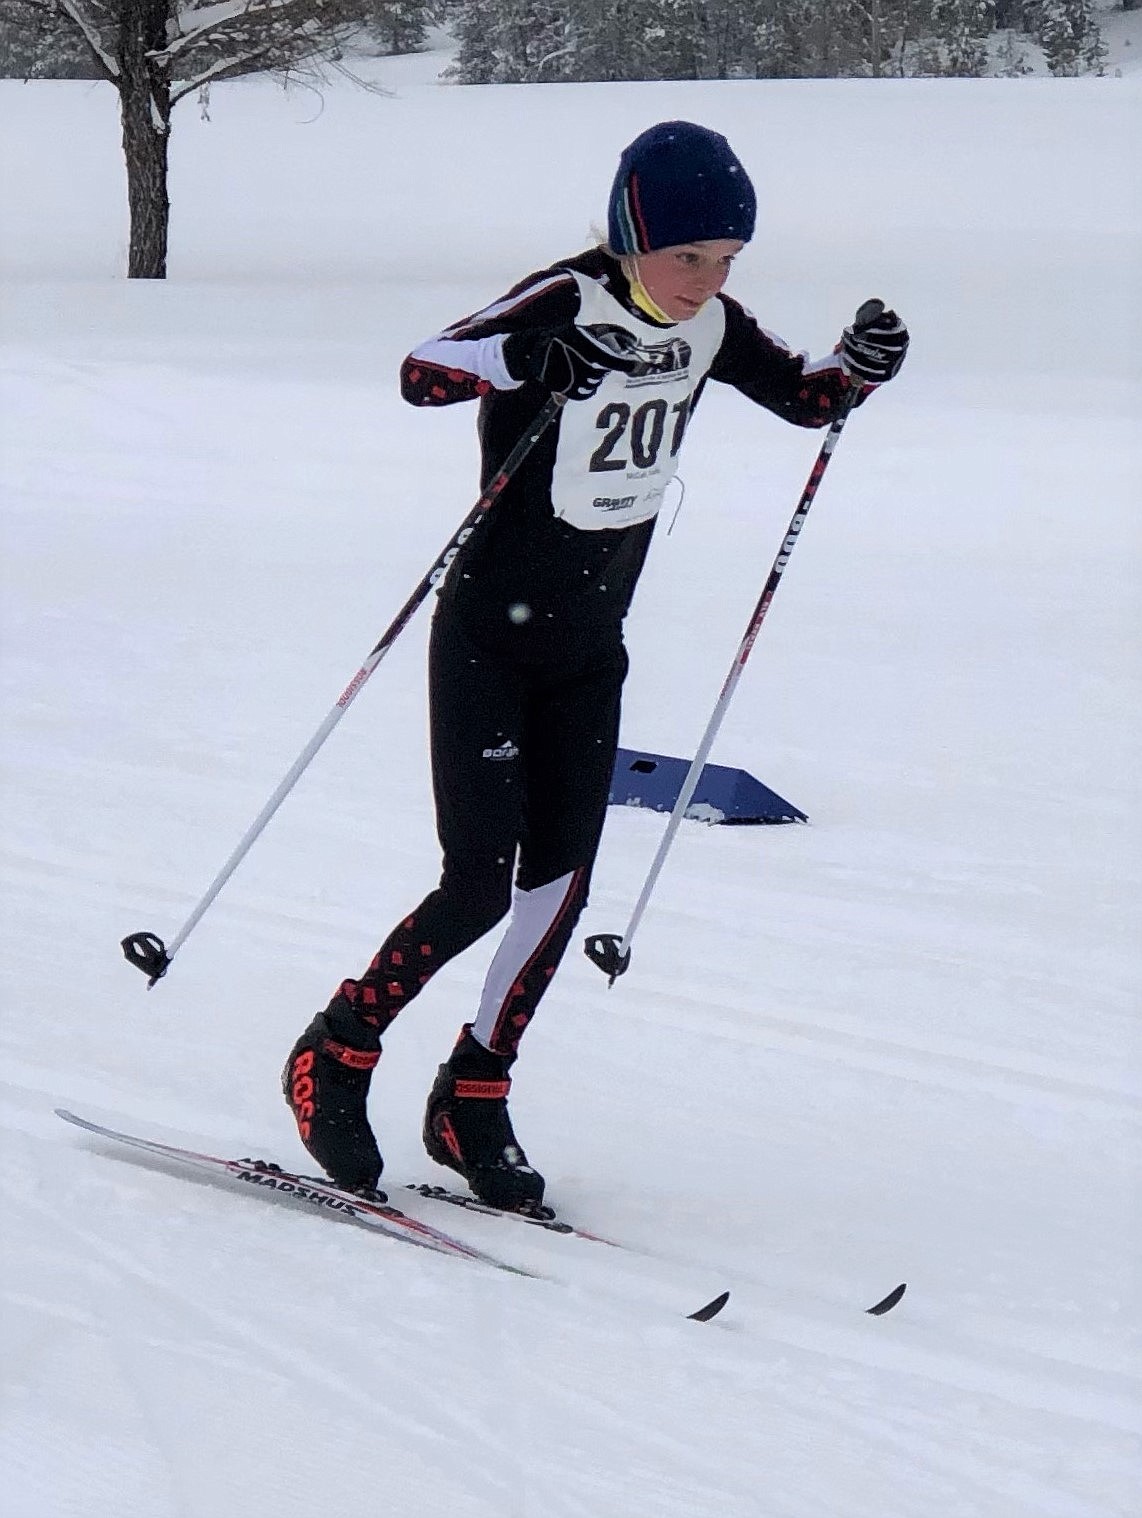 Jonas Benson, 12, competes in a cross country race this past weekend in McCall, Idaho.